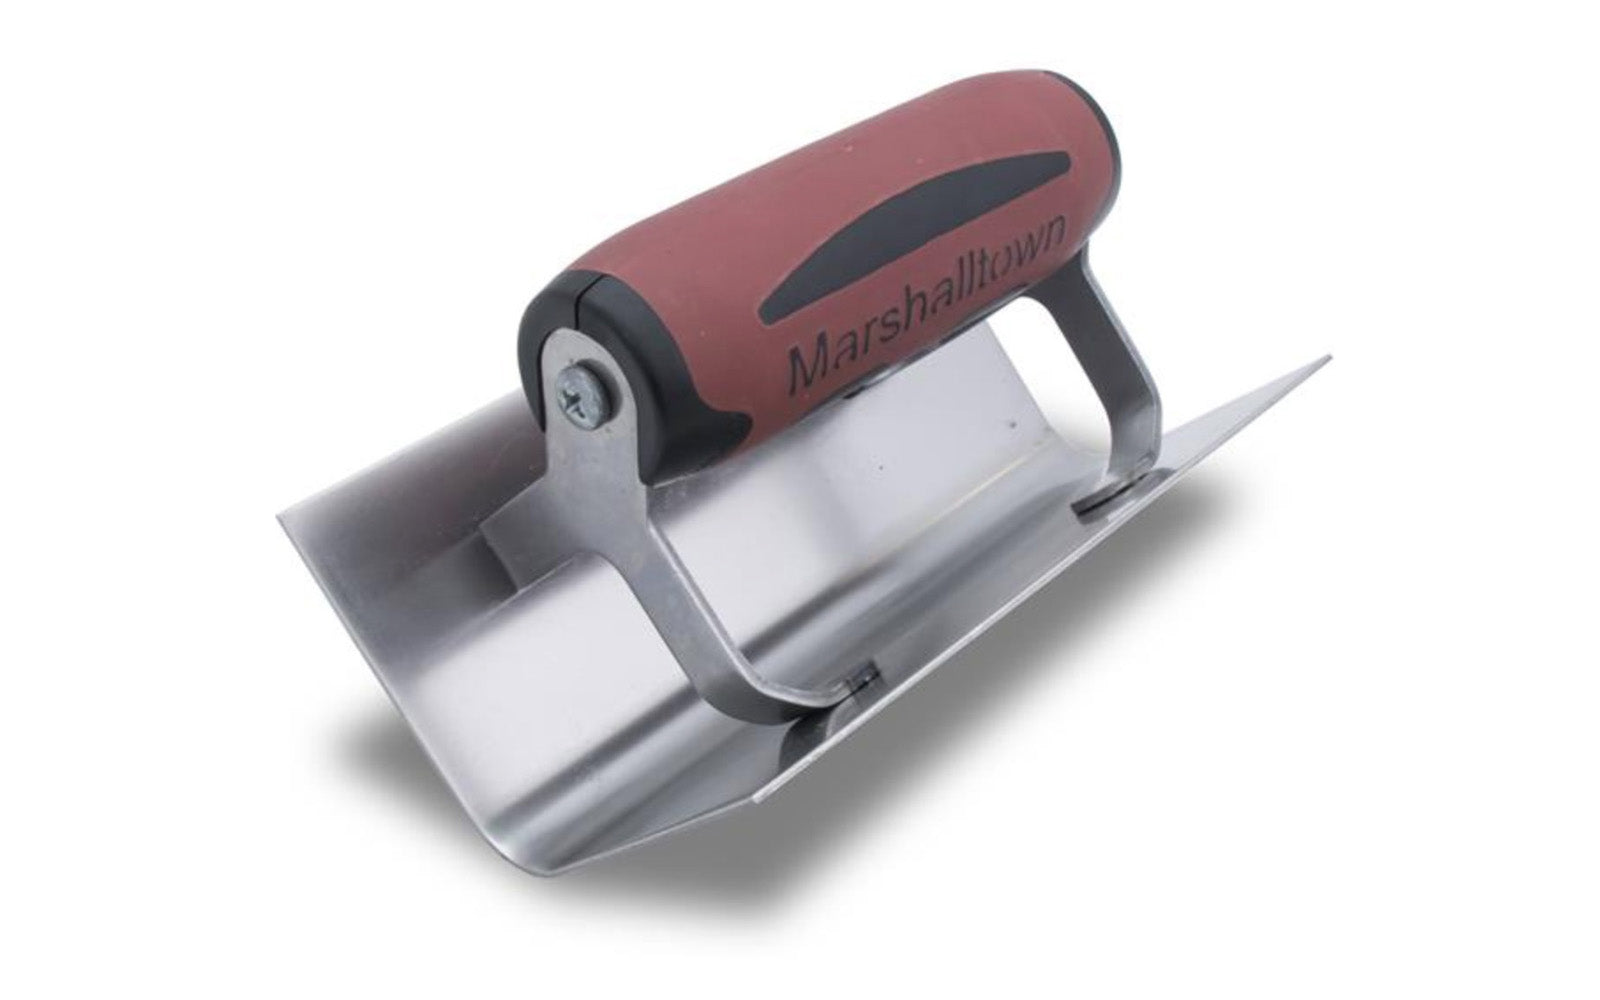 Marshalltown 6" x 2-1/2" Stainless Inside Corner Trowel - Radius Corner Style. Ideal for creating corners & edges on concrete steps or anywhere where square and rounded corners are needed. The stainless steel blade is durable, easy to clean, and is fitted with a comfortable soft grip "DuraSoft" handle that reduces fatigue when using this tool.  Model 66SSD ~ 035965041249